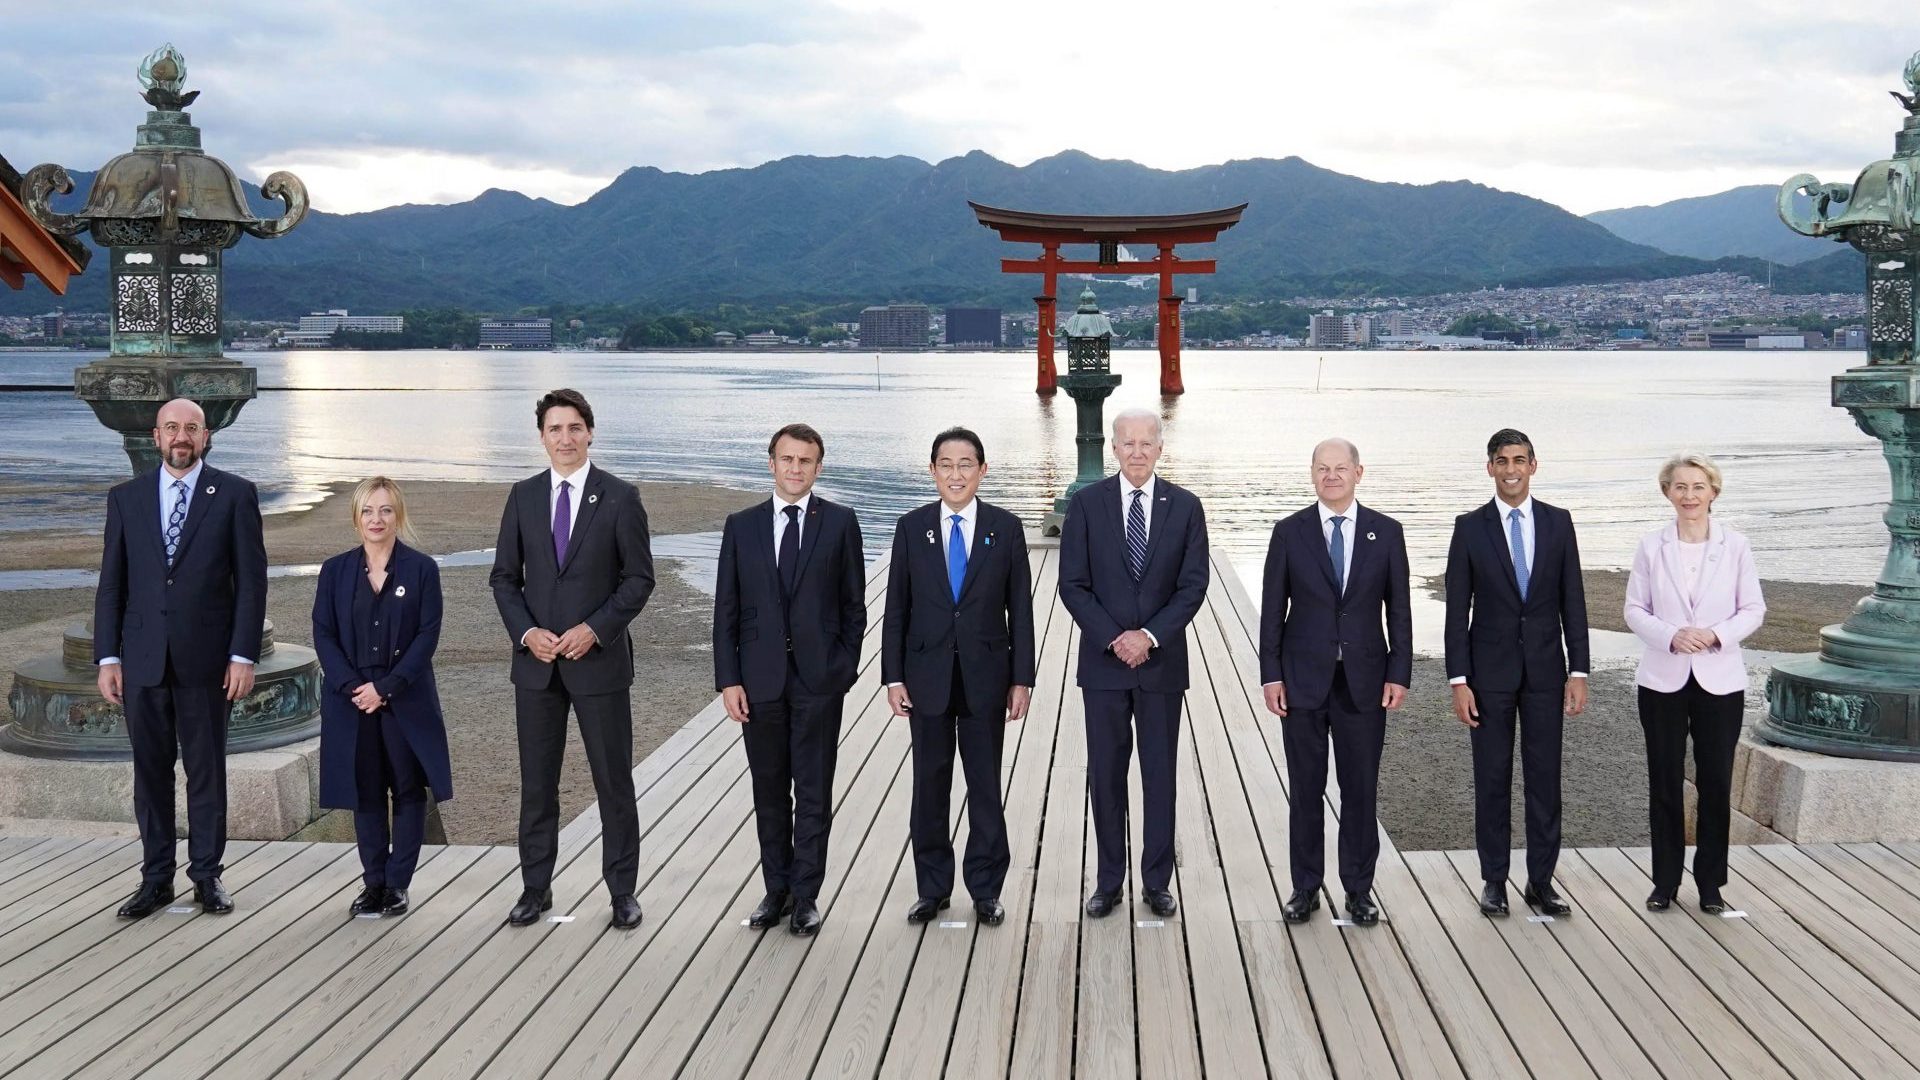 G7 leaders pose for the family photo at the Itsukushima Shrine during the G7 Summit on May 19, 2023 in Hiroshima, Japan. Photo: Stefan Rousseau - Pool/Getty Images